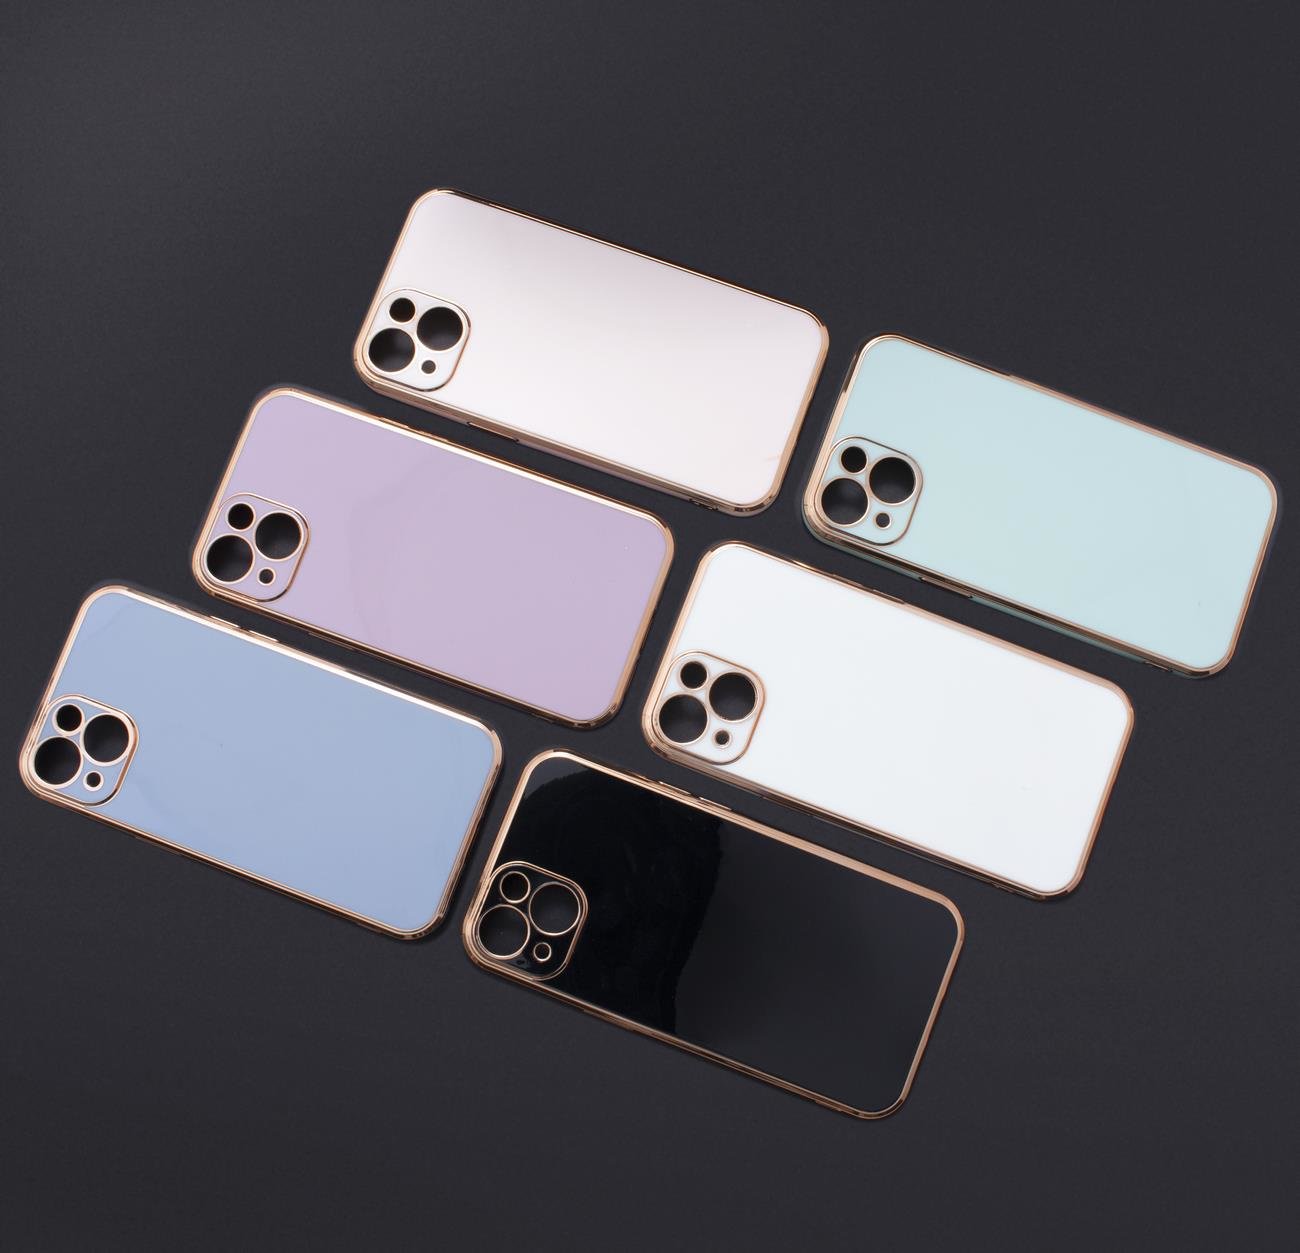 Lighting Color Case for iPhone 12 Pro Max black gel cover with gold frame